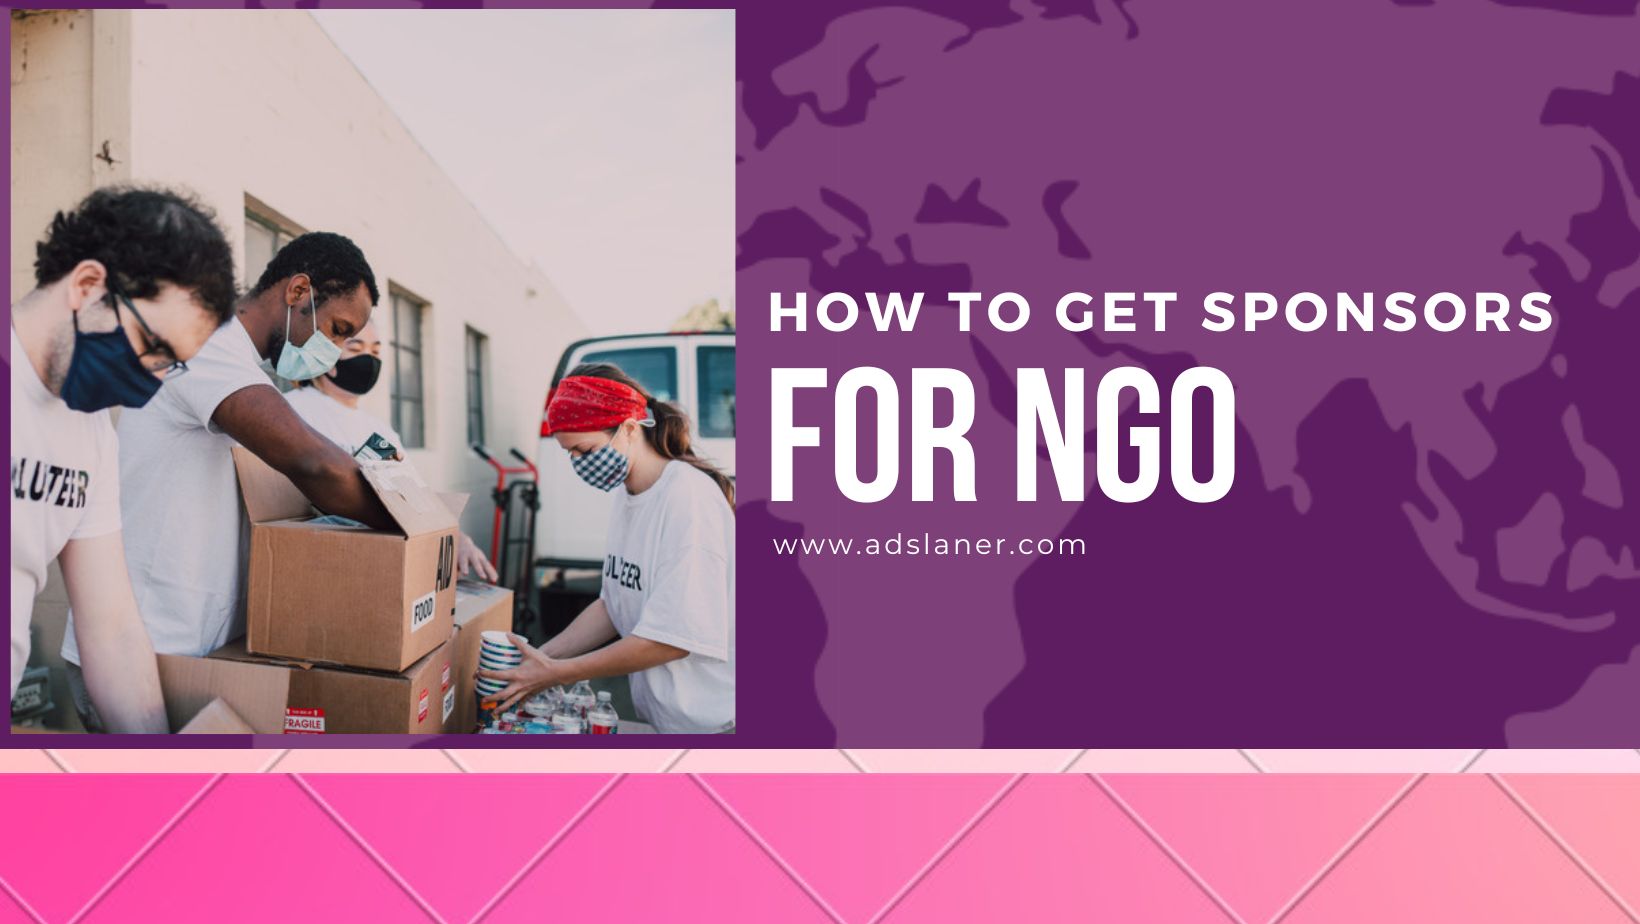 How to get sponsors for NGO